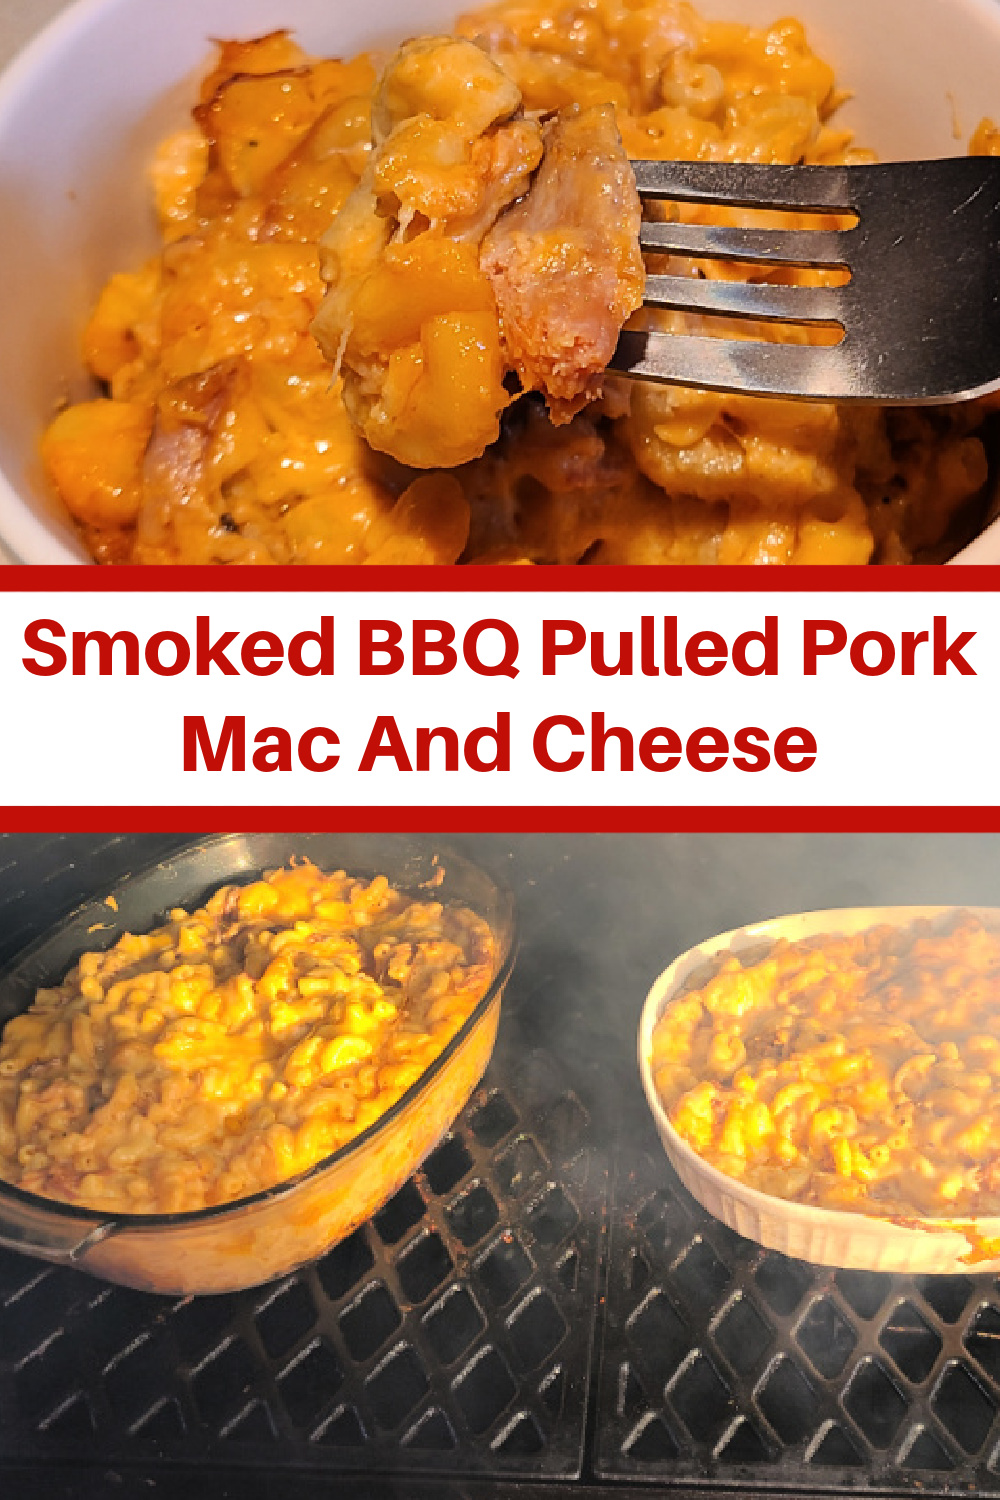 Smoked BBQ Pulled Pork Mac And Cheese Recipe